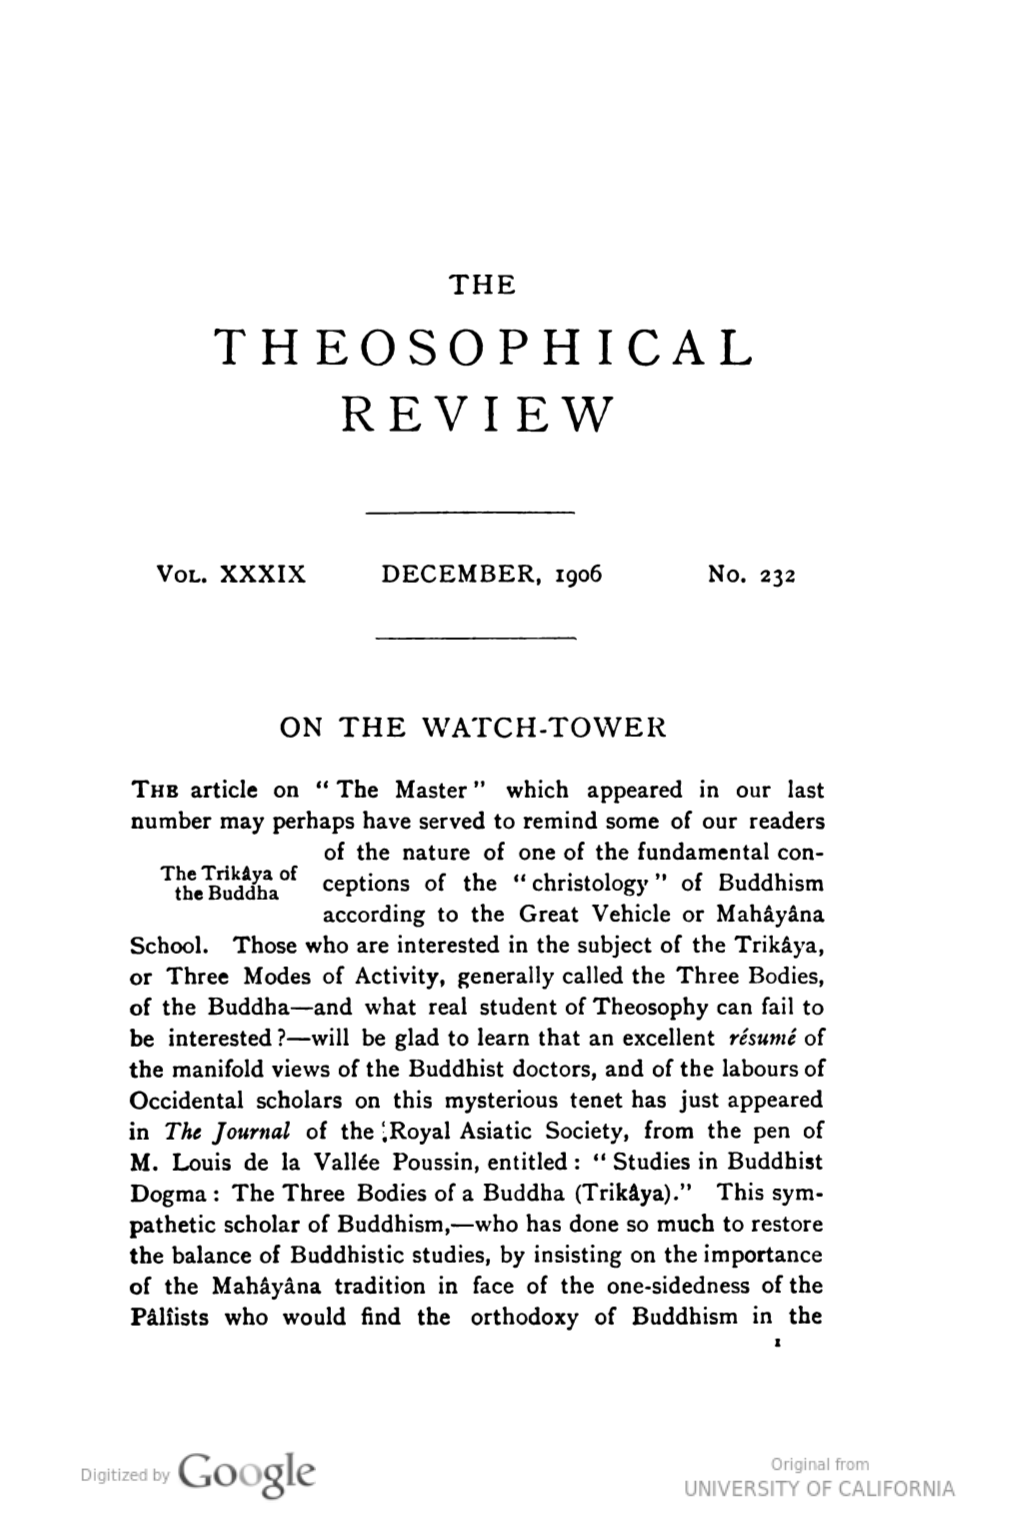 Theosophical Review V39 N232 Dec 1906